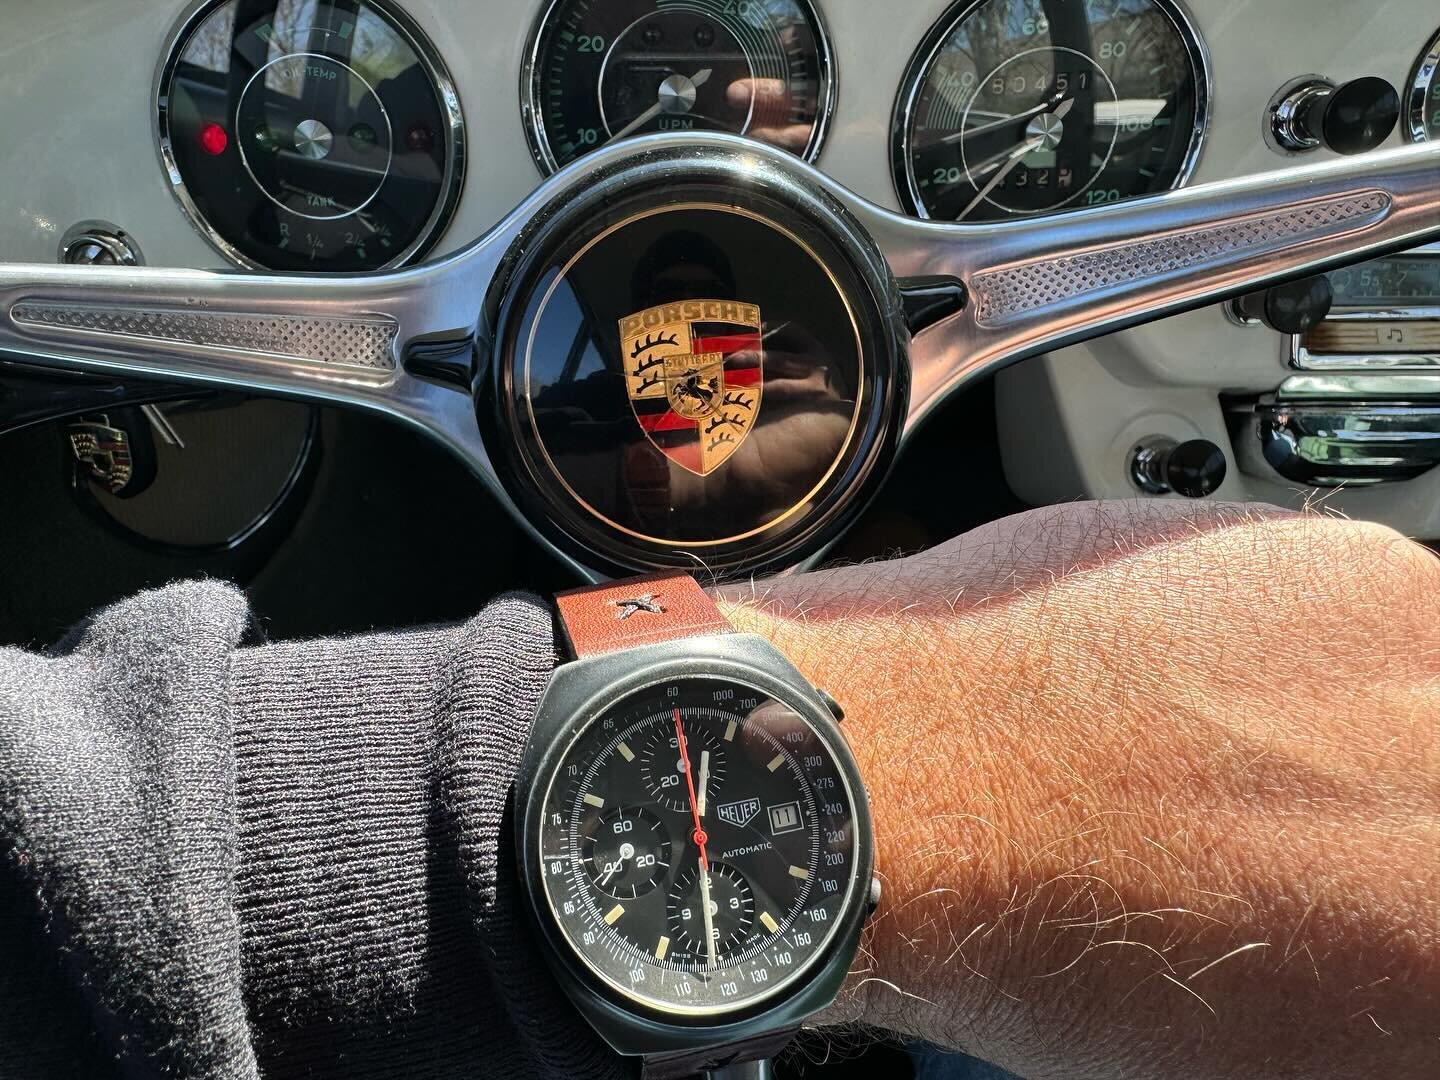 Porsche + Heuer is always a great combo! I must say, ever since I started listing to Spike&rsquo;s Car Radio with @spikeferesten @zuckerman and @jonnylieberman I&rsquo;ve definitely become more of a watch guy. Keep up the good work fellas 👌🏼
&bull;